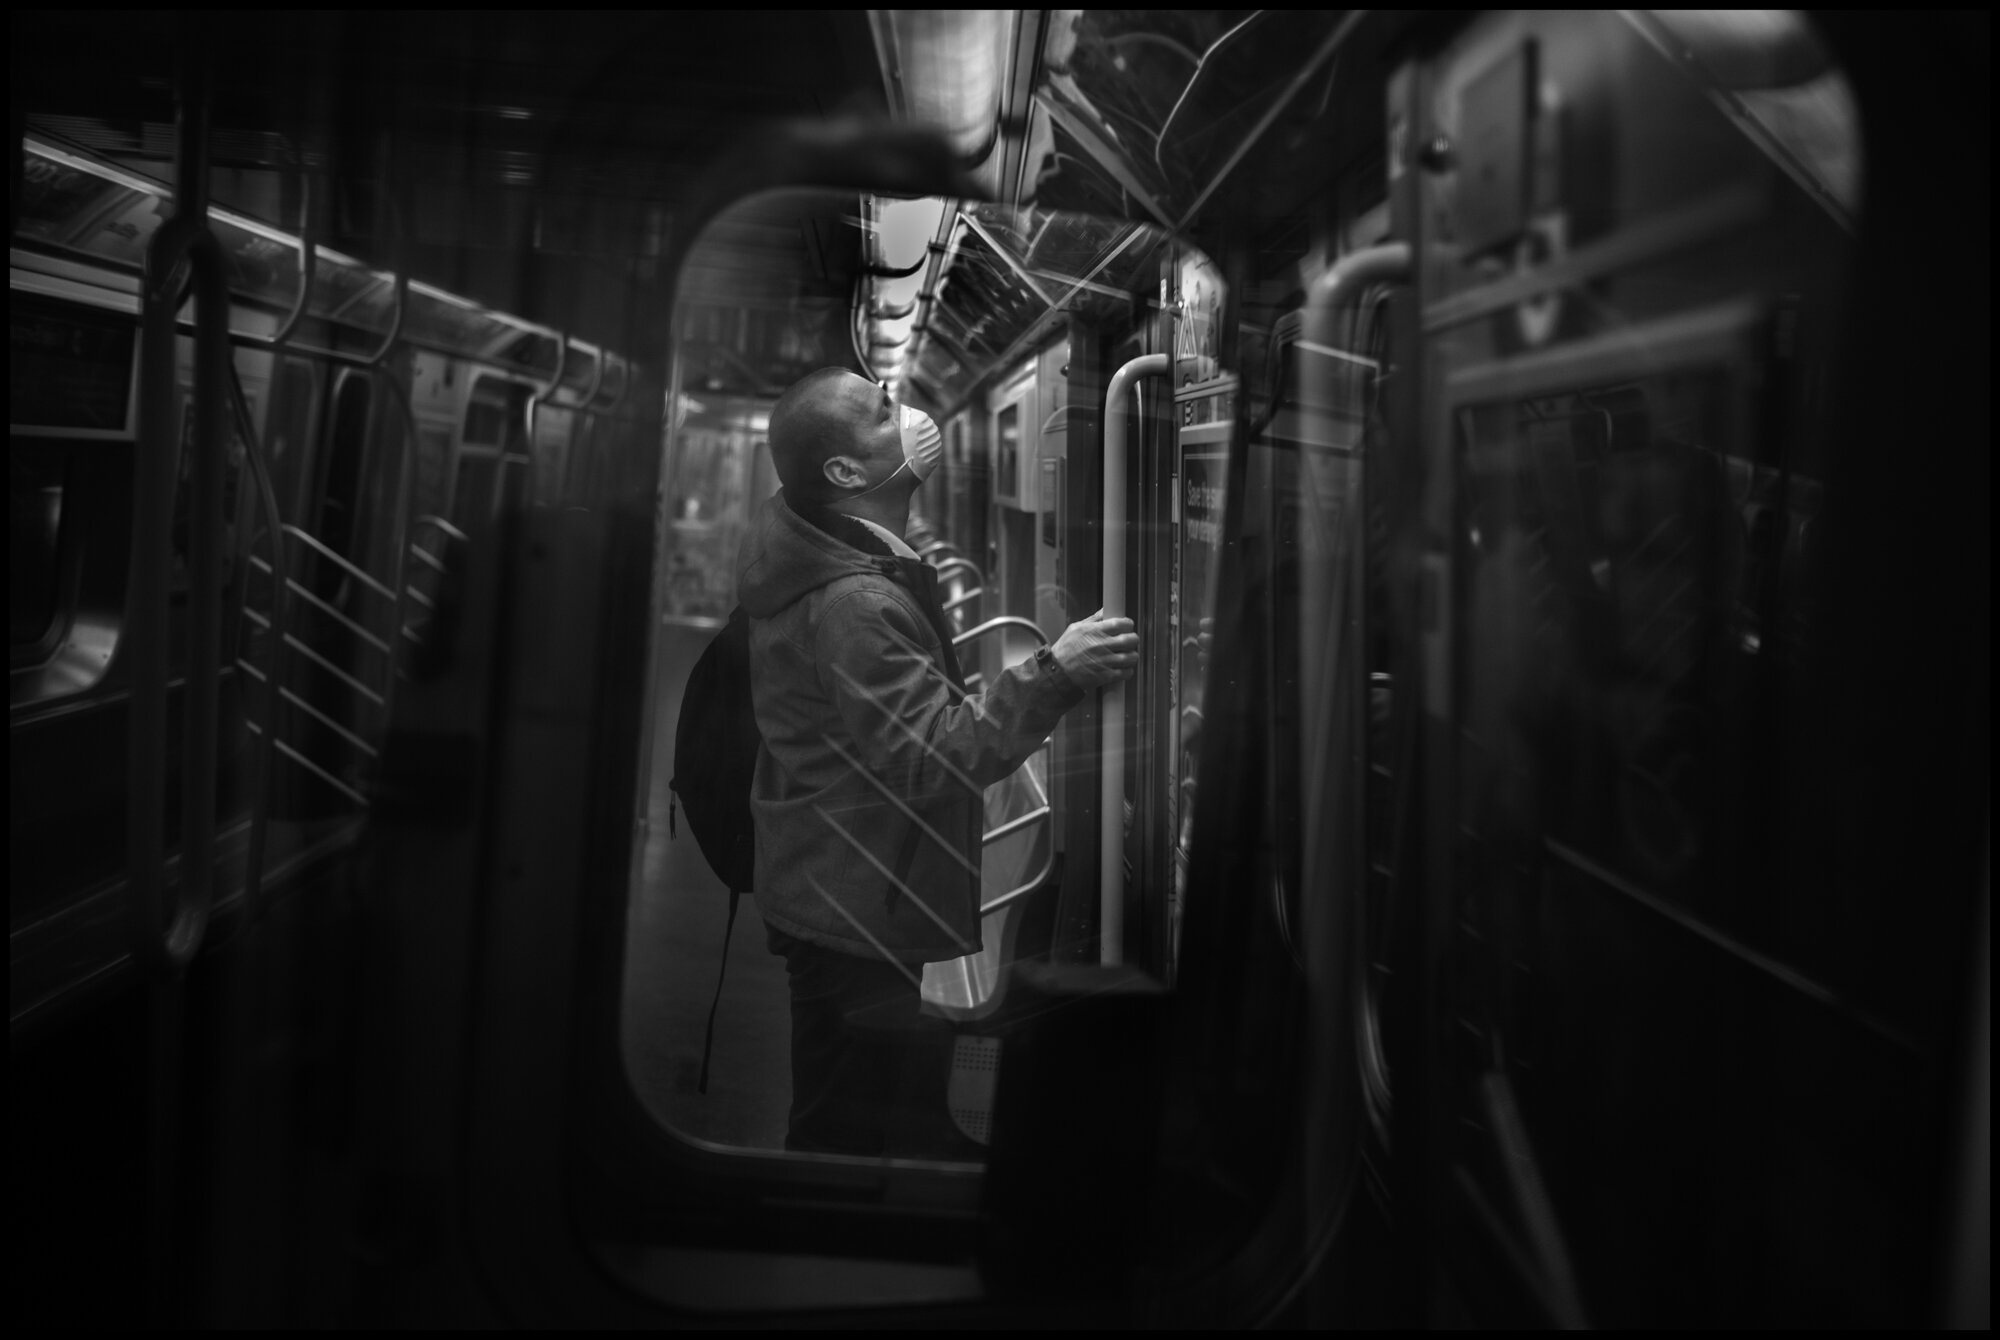  A train heading from Queens towards Manhattan.  March 29, 2020. © Peter Turnley  ID# 07-018 